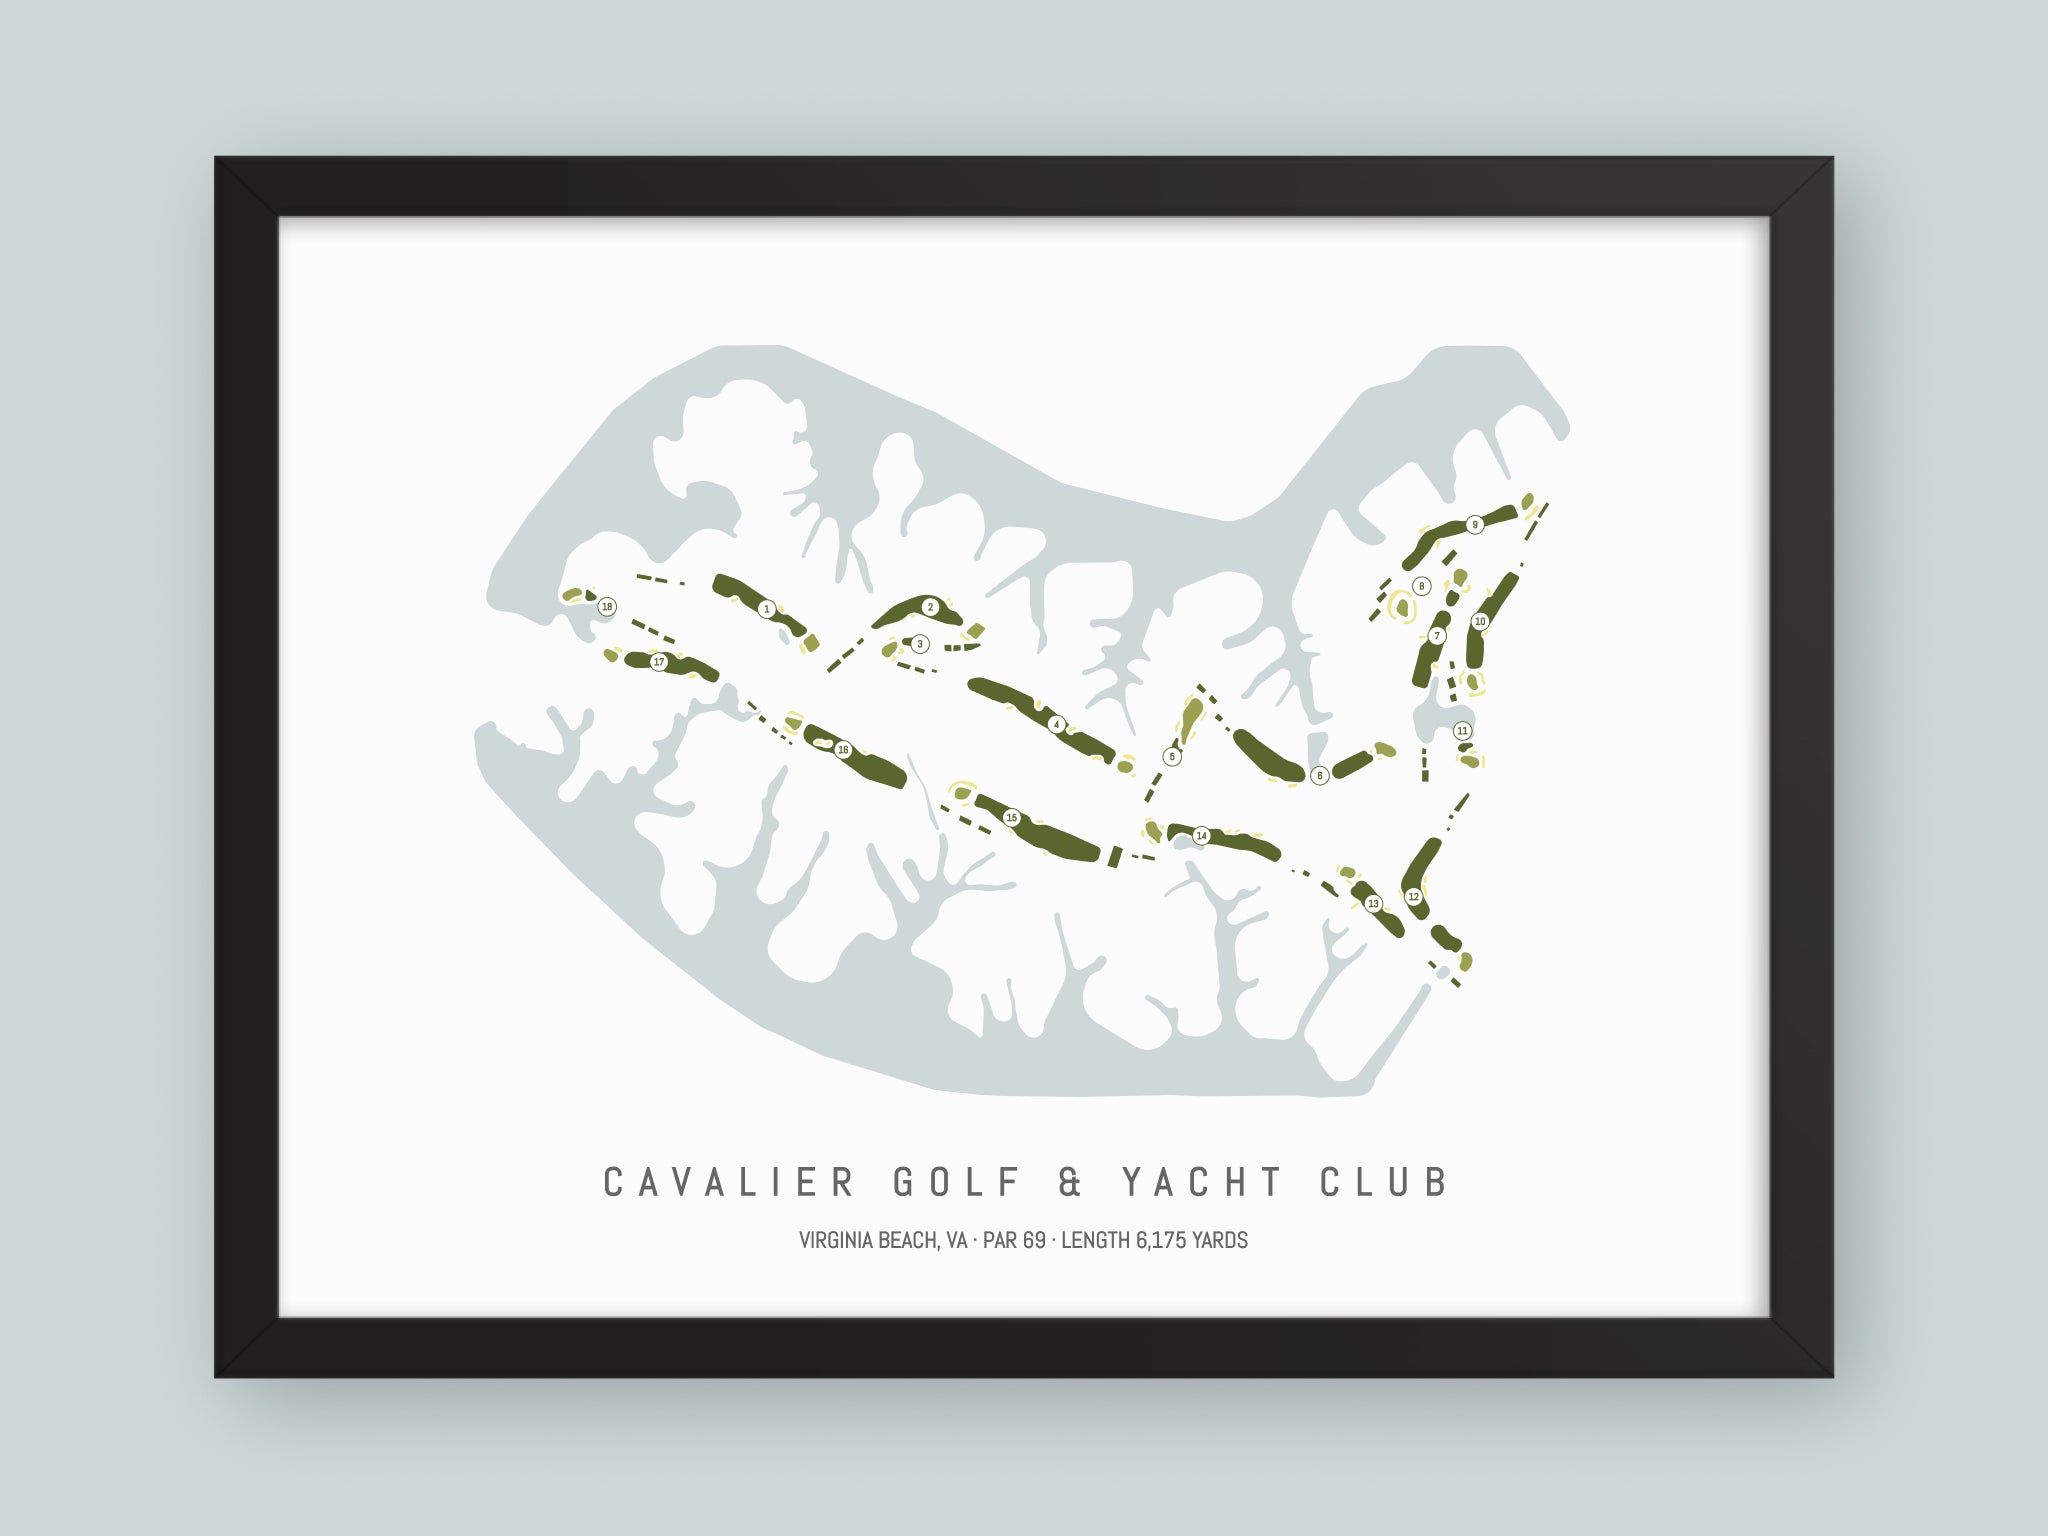 Cavalier-Golf-And-Yacht-Club-VA--Black-Frame-24x18-With-Hole-Numbers